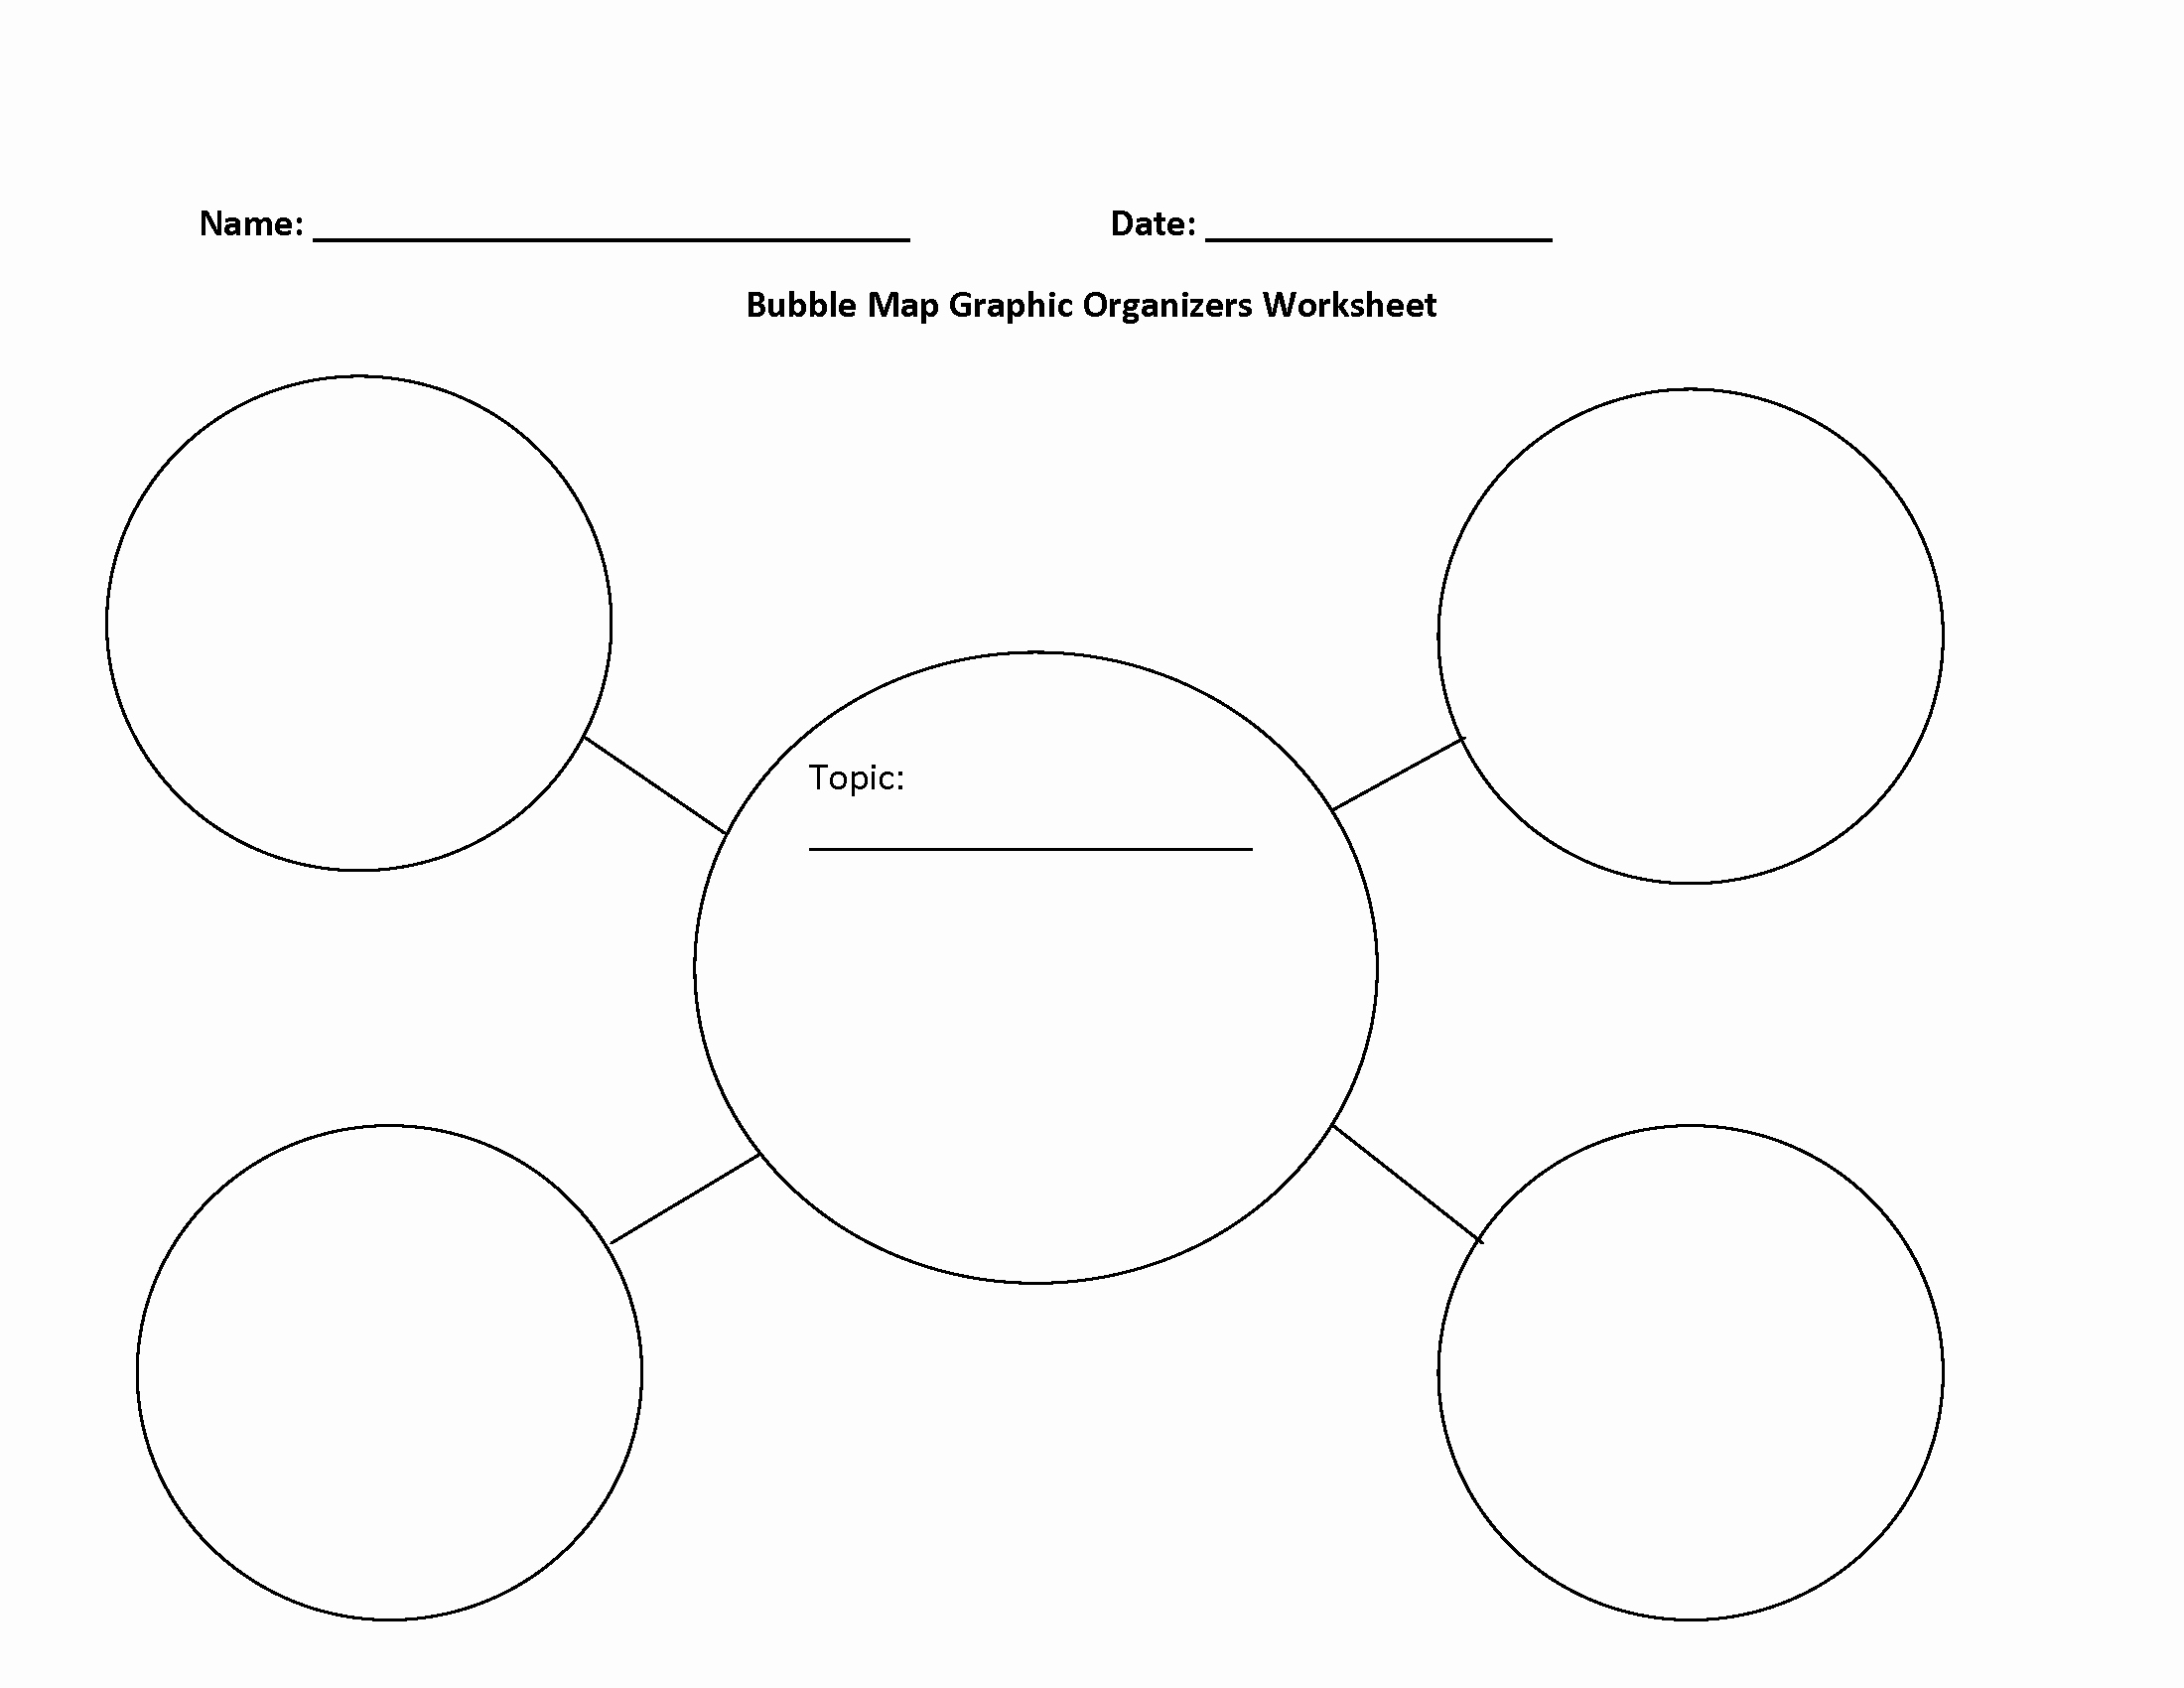 Bubble Map Template Word Elegant Bubble Map Graphic organizers Worksheet